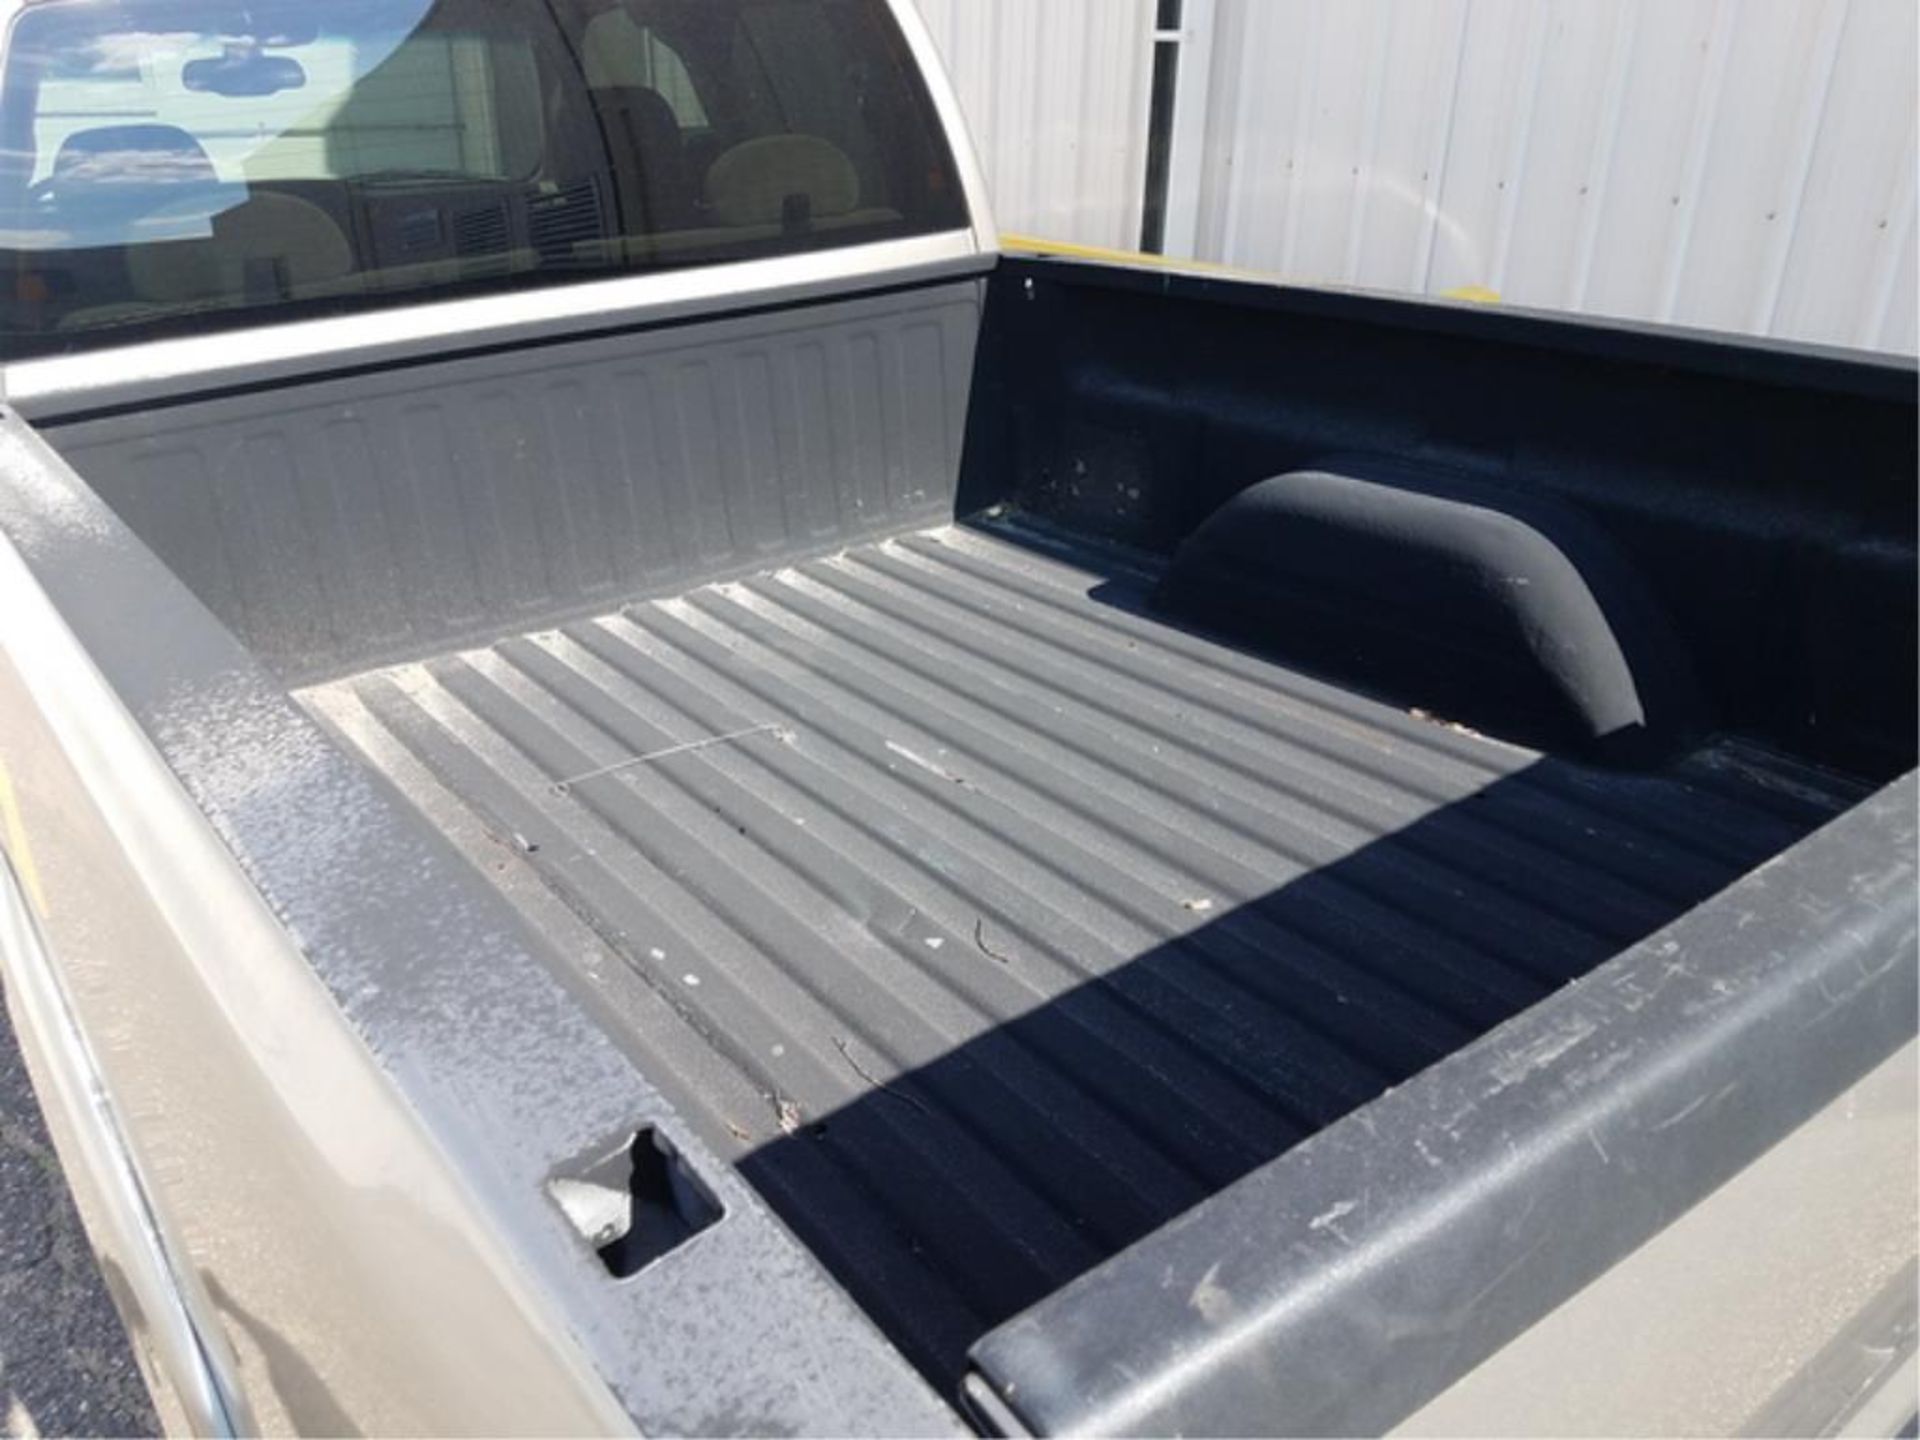 Extended Cab Pickup Truck - Image 12 of 26